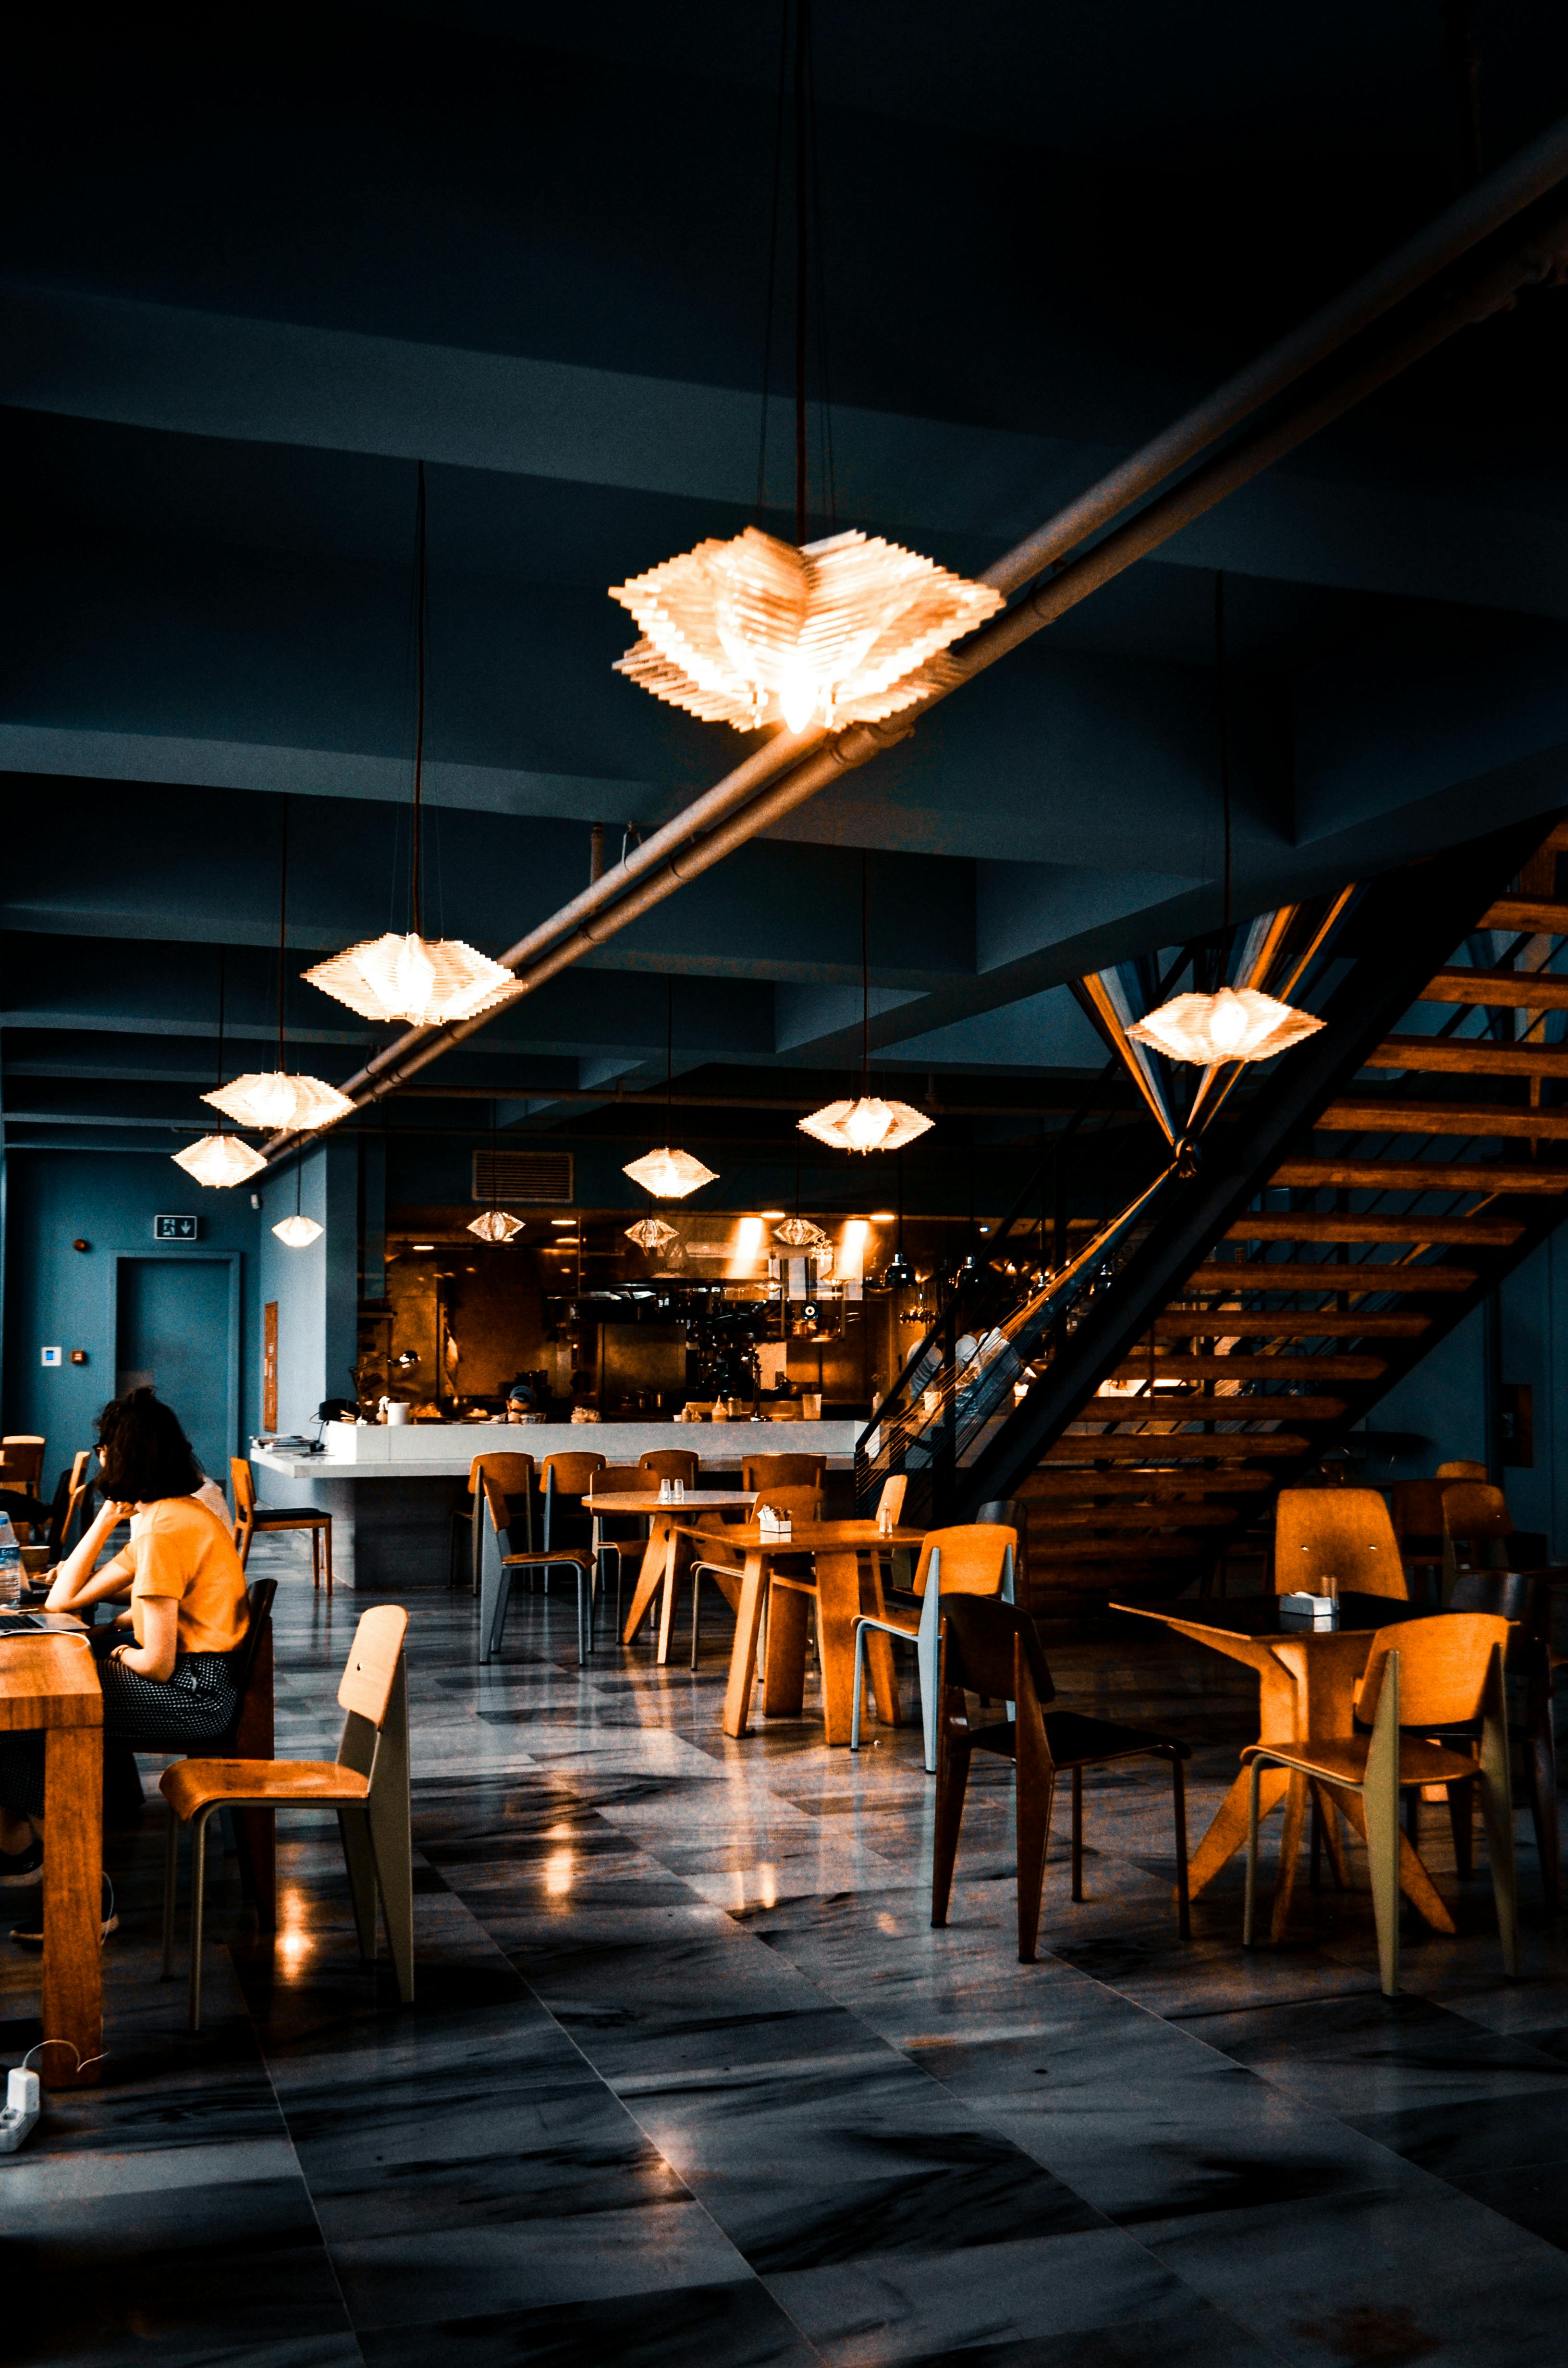 trendy interior of cafe with creative lamps and wooden furniture